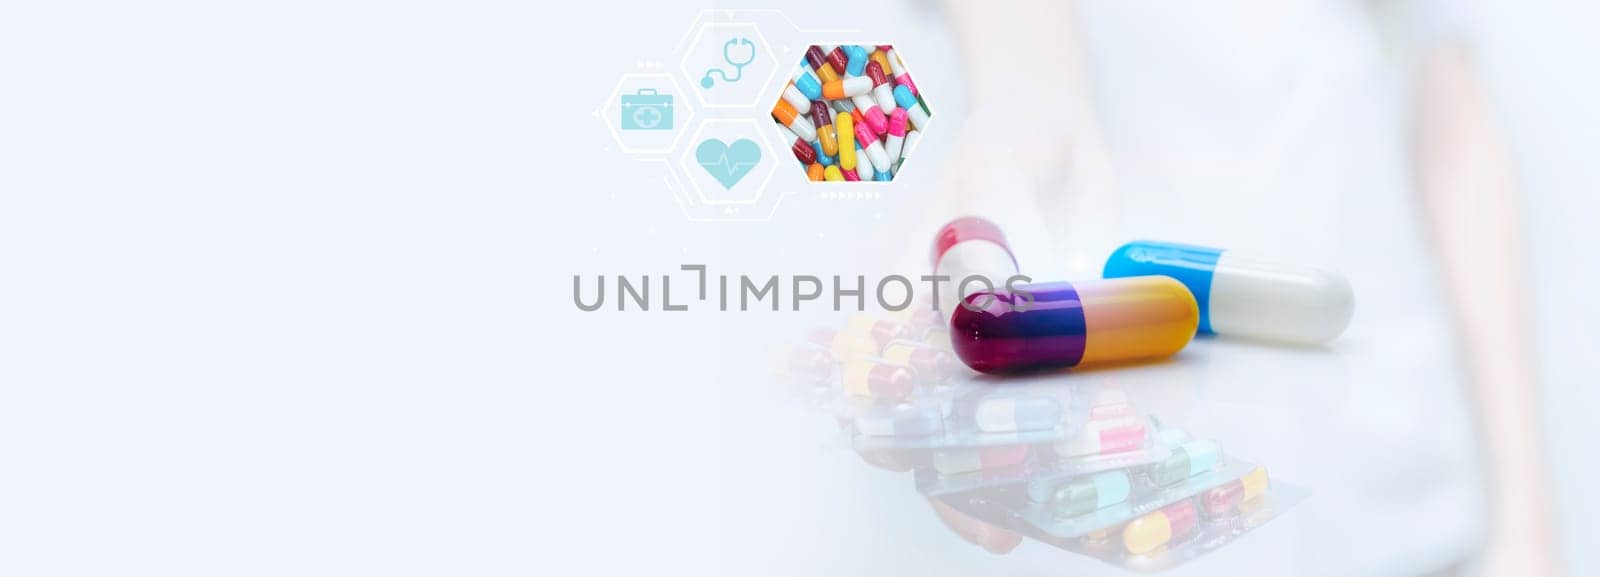 Antibiotic capsule pills and prescription drugs banner. Health care and medicine. Pharmacists prescribed medicine. World pharmacist day. Medical care in hospital. Doctor giving pills. by Fahroni